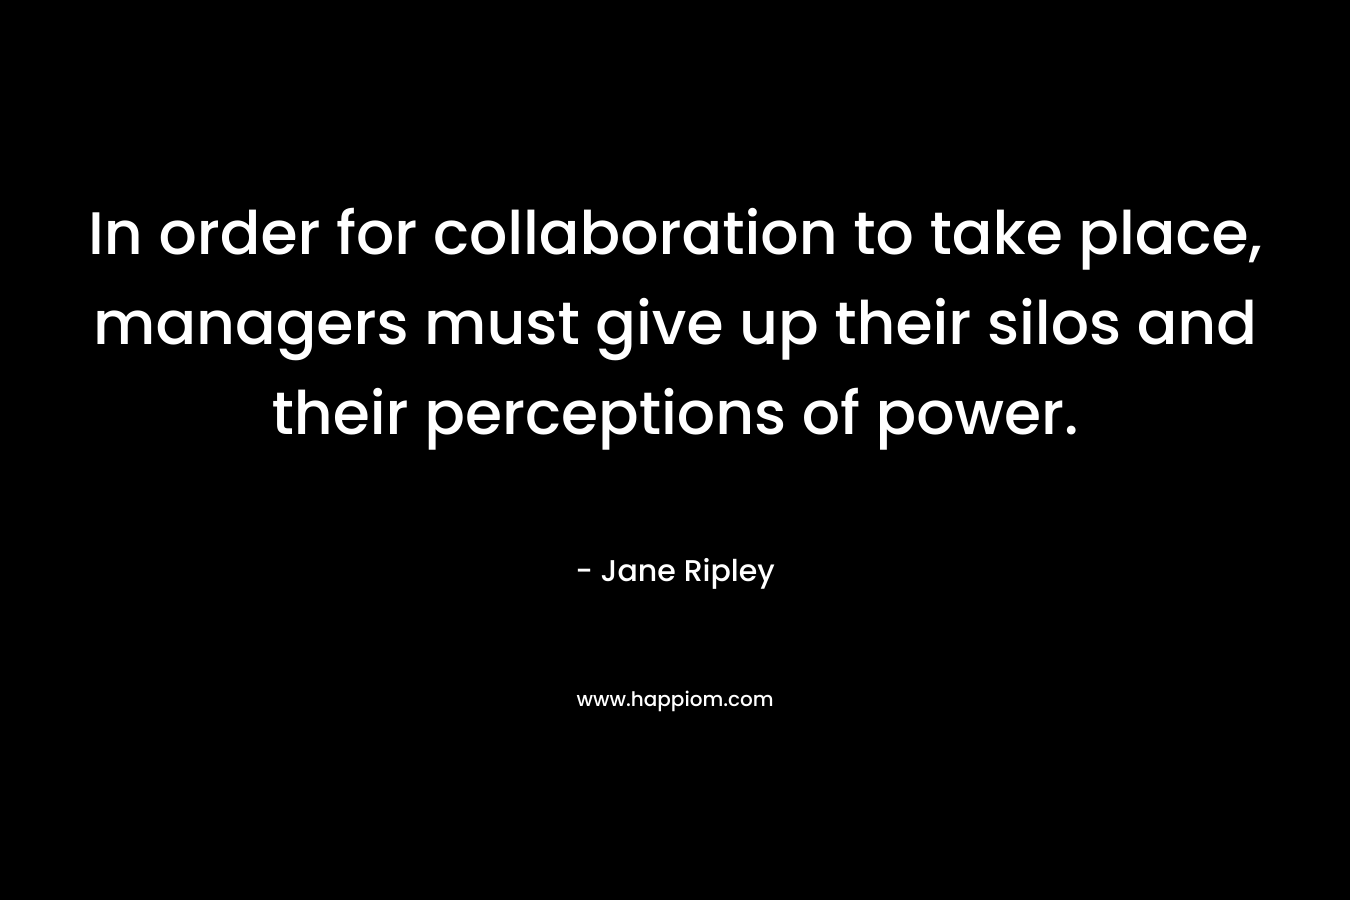 In order for collaboration to take place, managers must give up their silos and their perceptions of power. – Jane Ripley